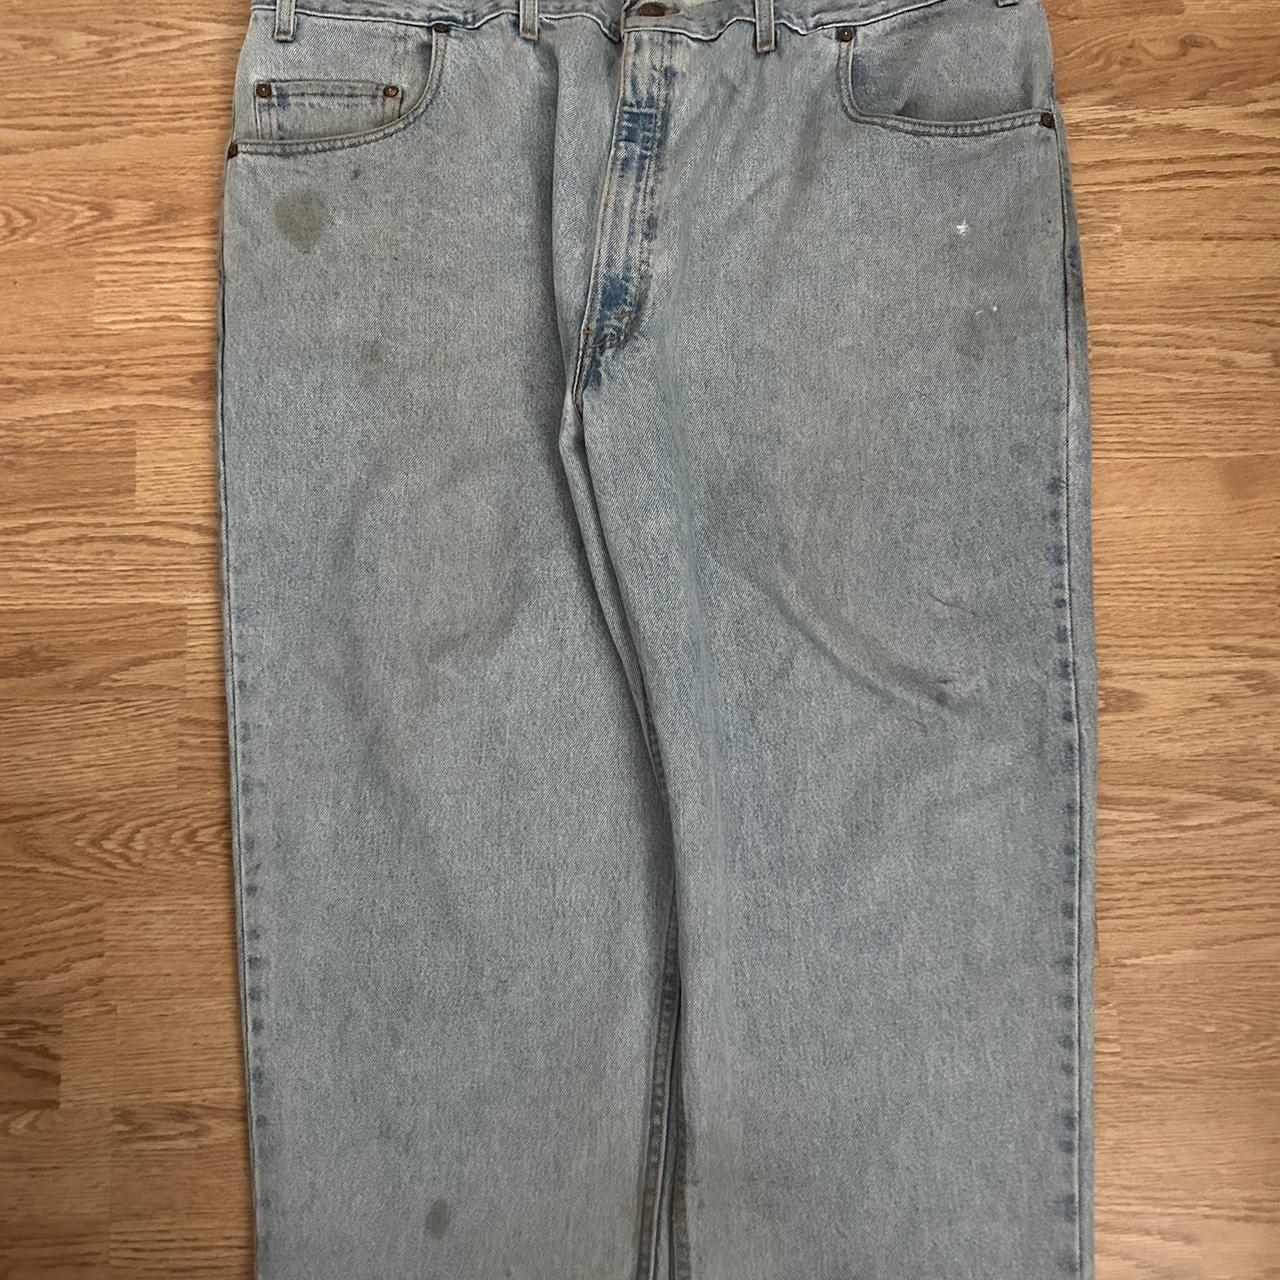 BIG ASS LEVI JEANS size 46 by 30 very baggy has some... - Depop